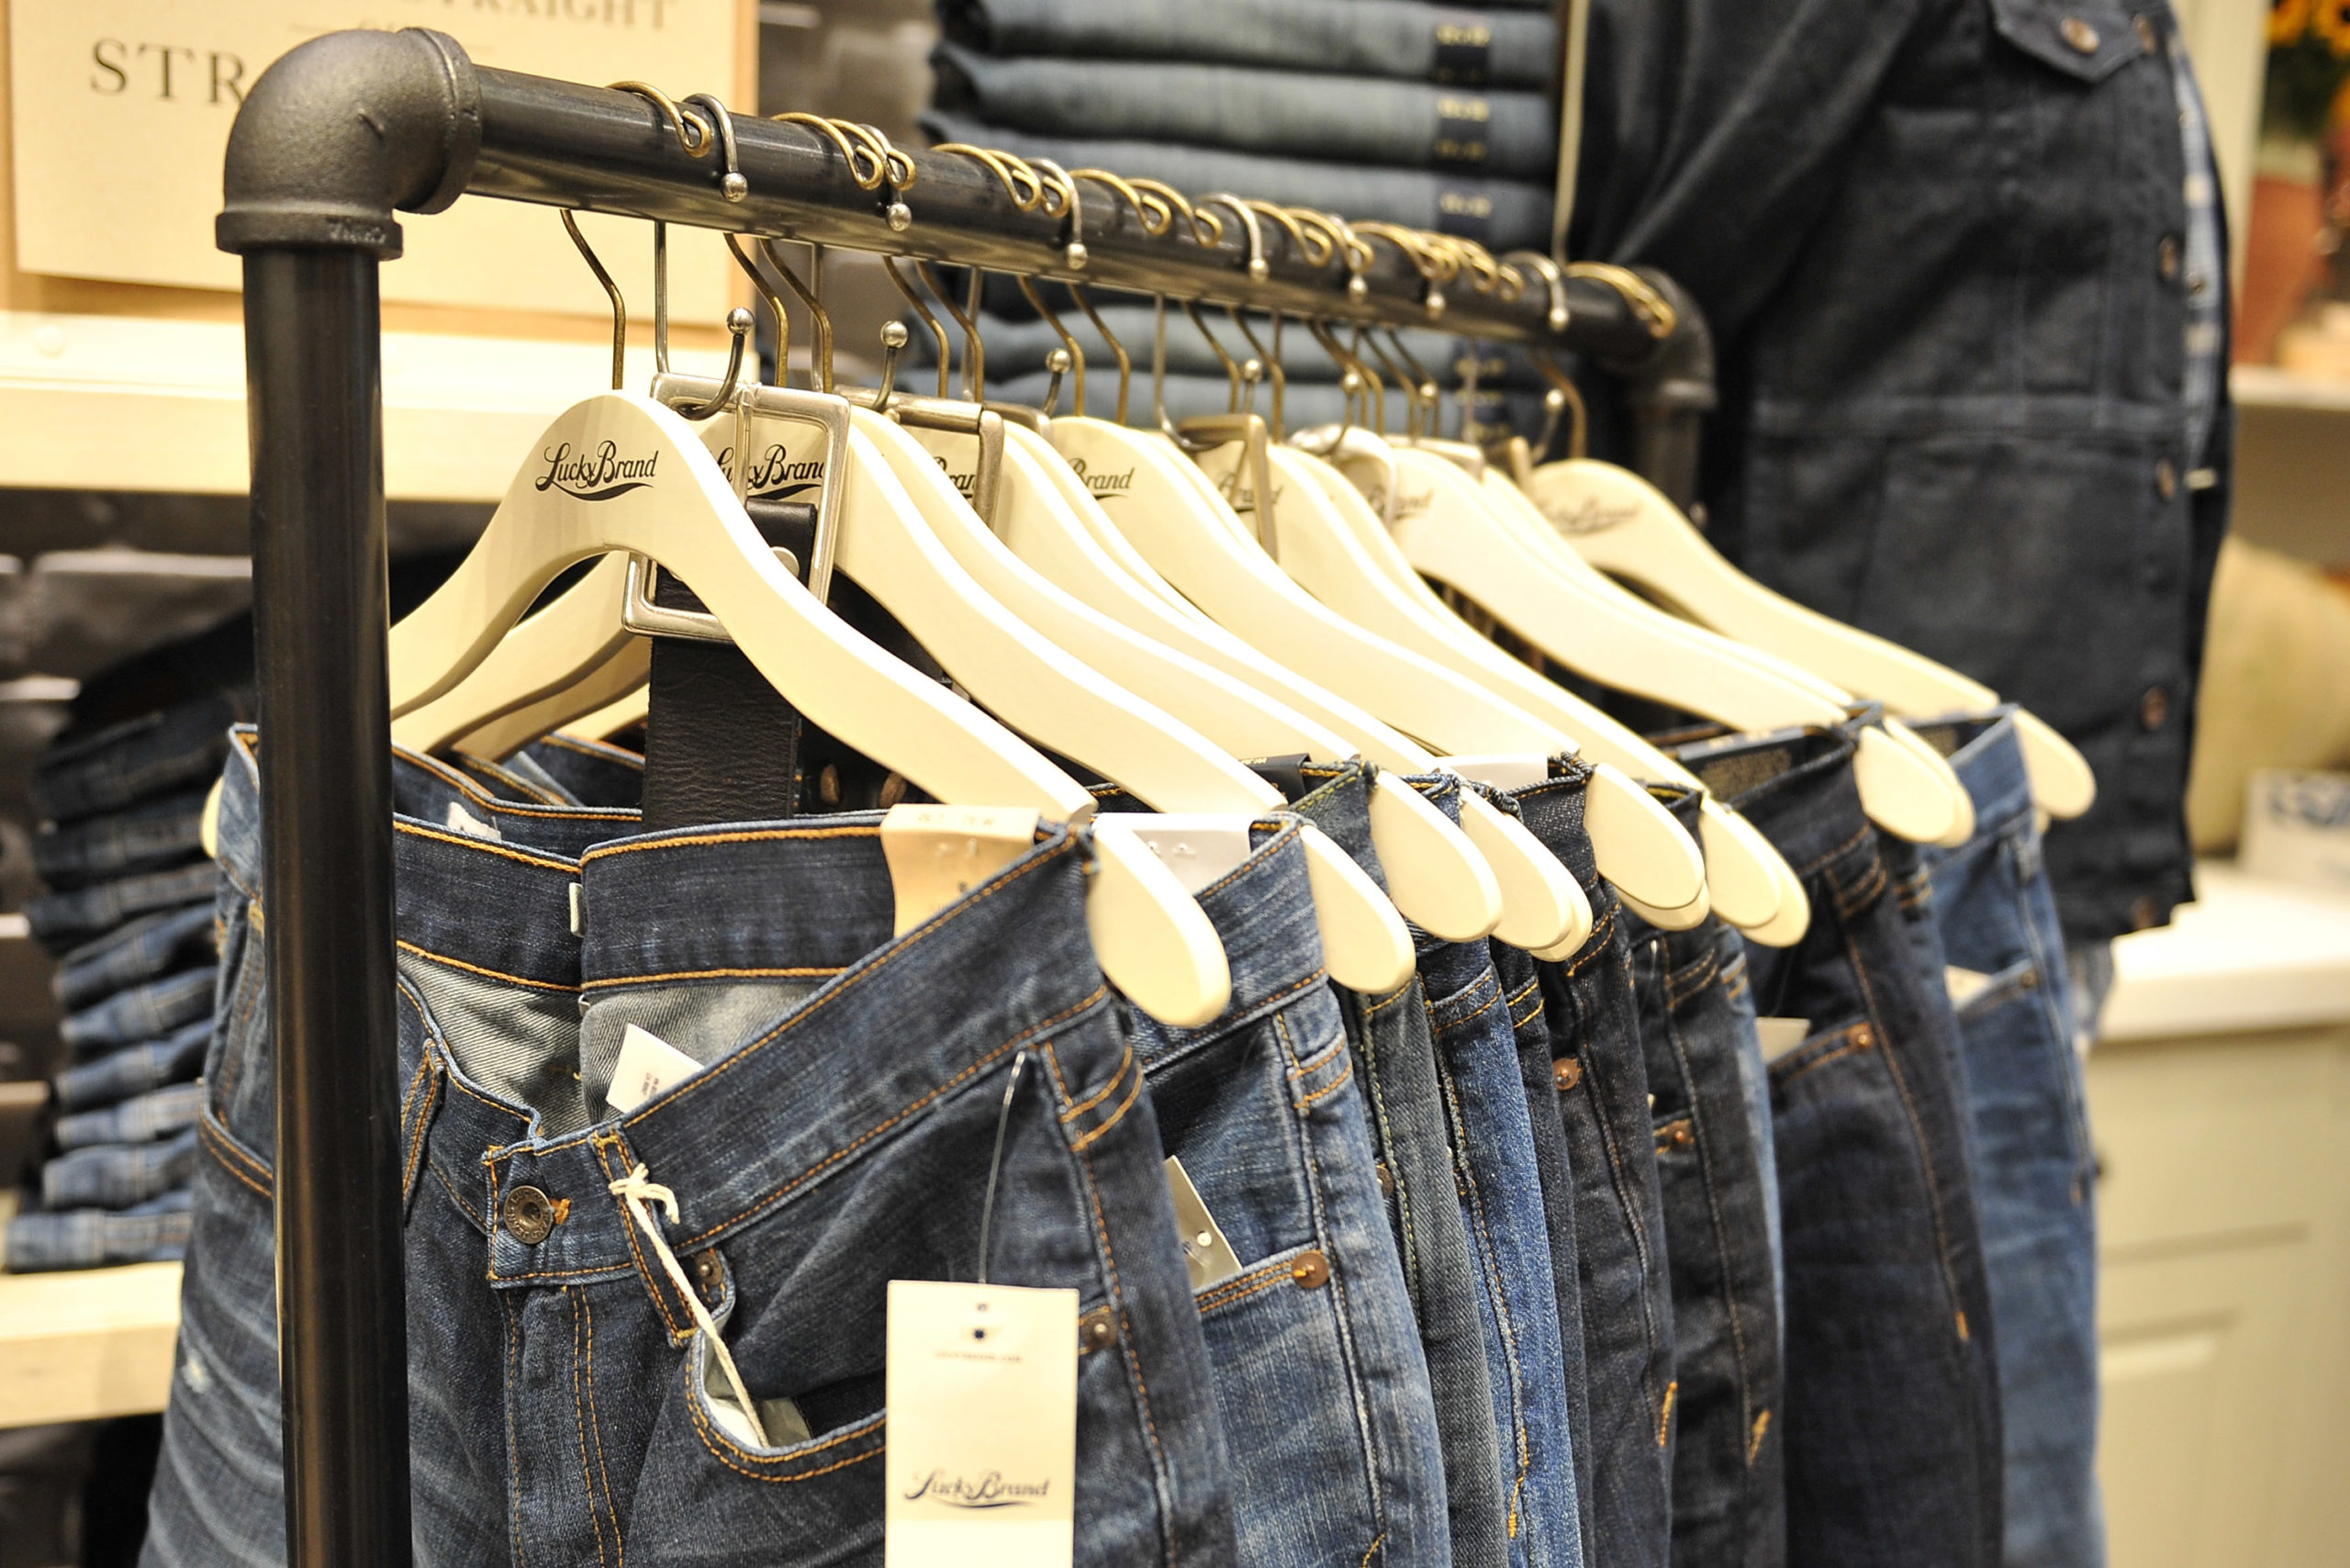 Lucky Brand Jeans at San Diego in San Diego, CA